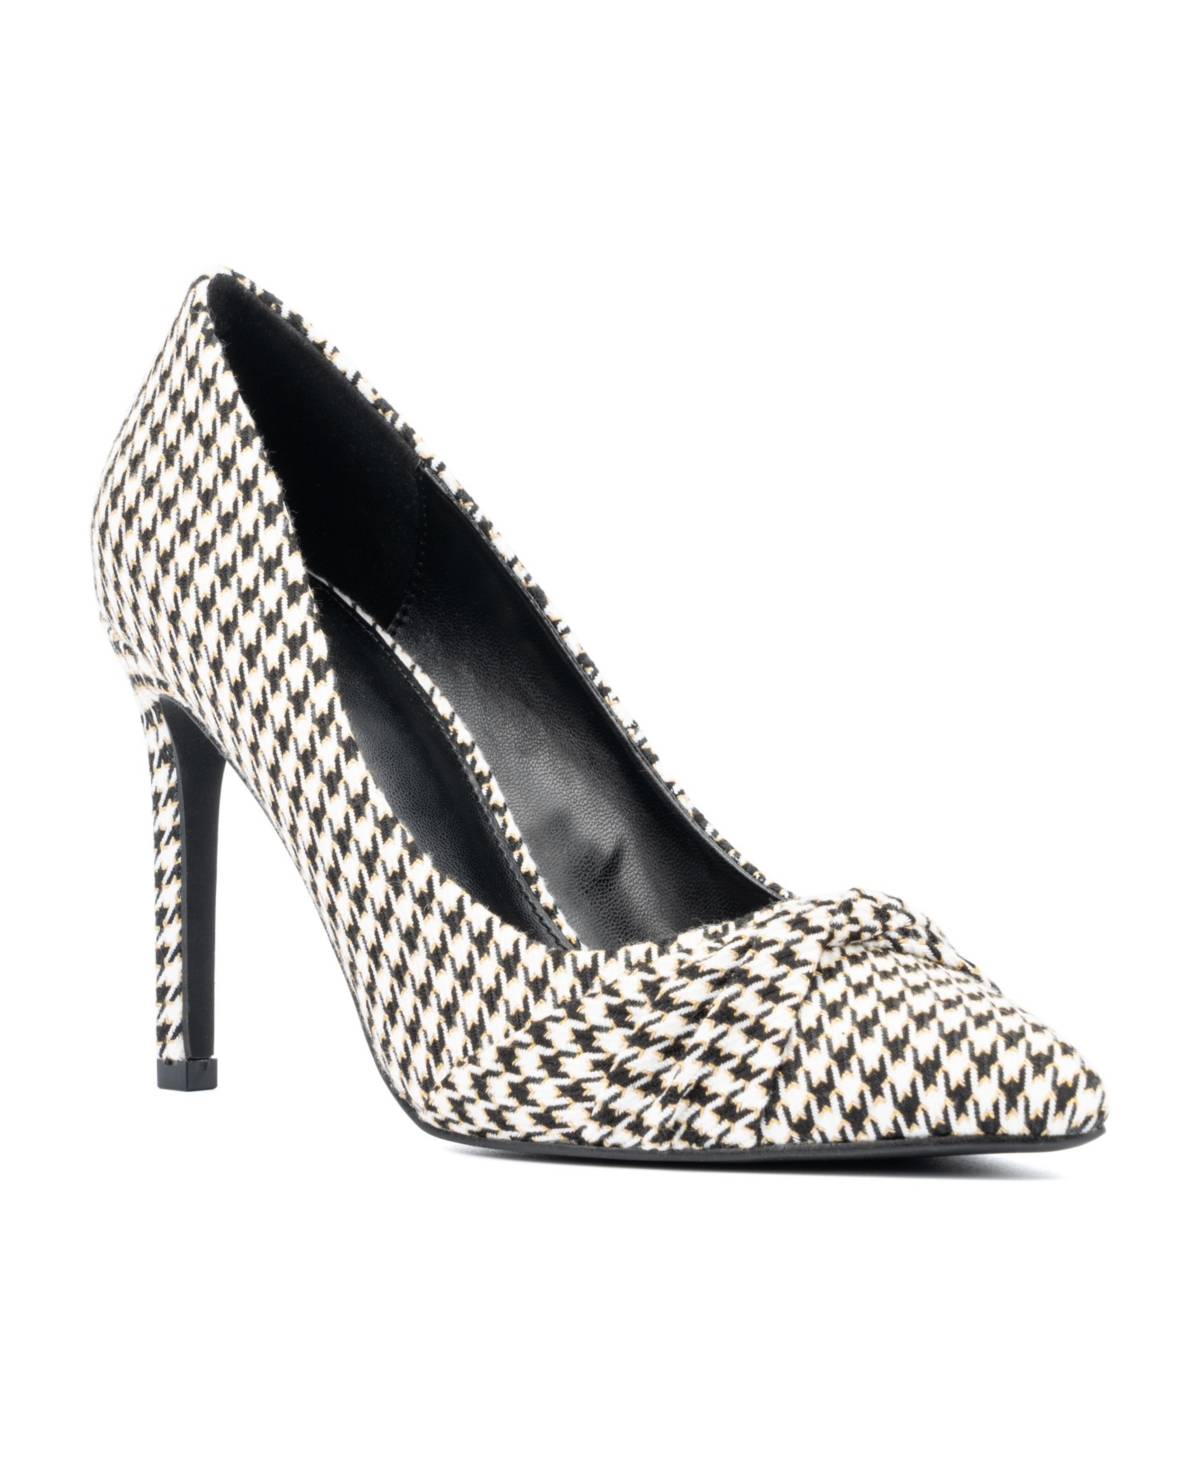 Women's Monique- Knotted Pointy High Heels Pumps - Black pattern